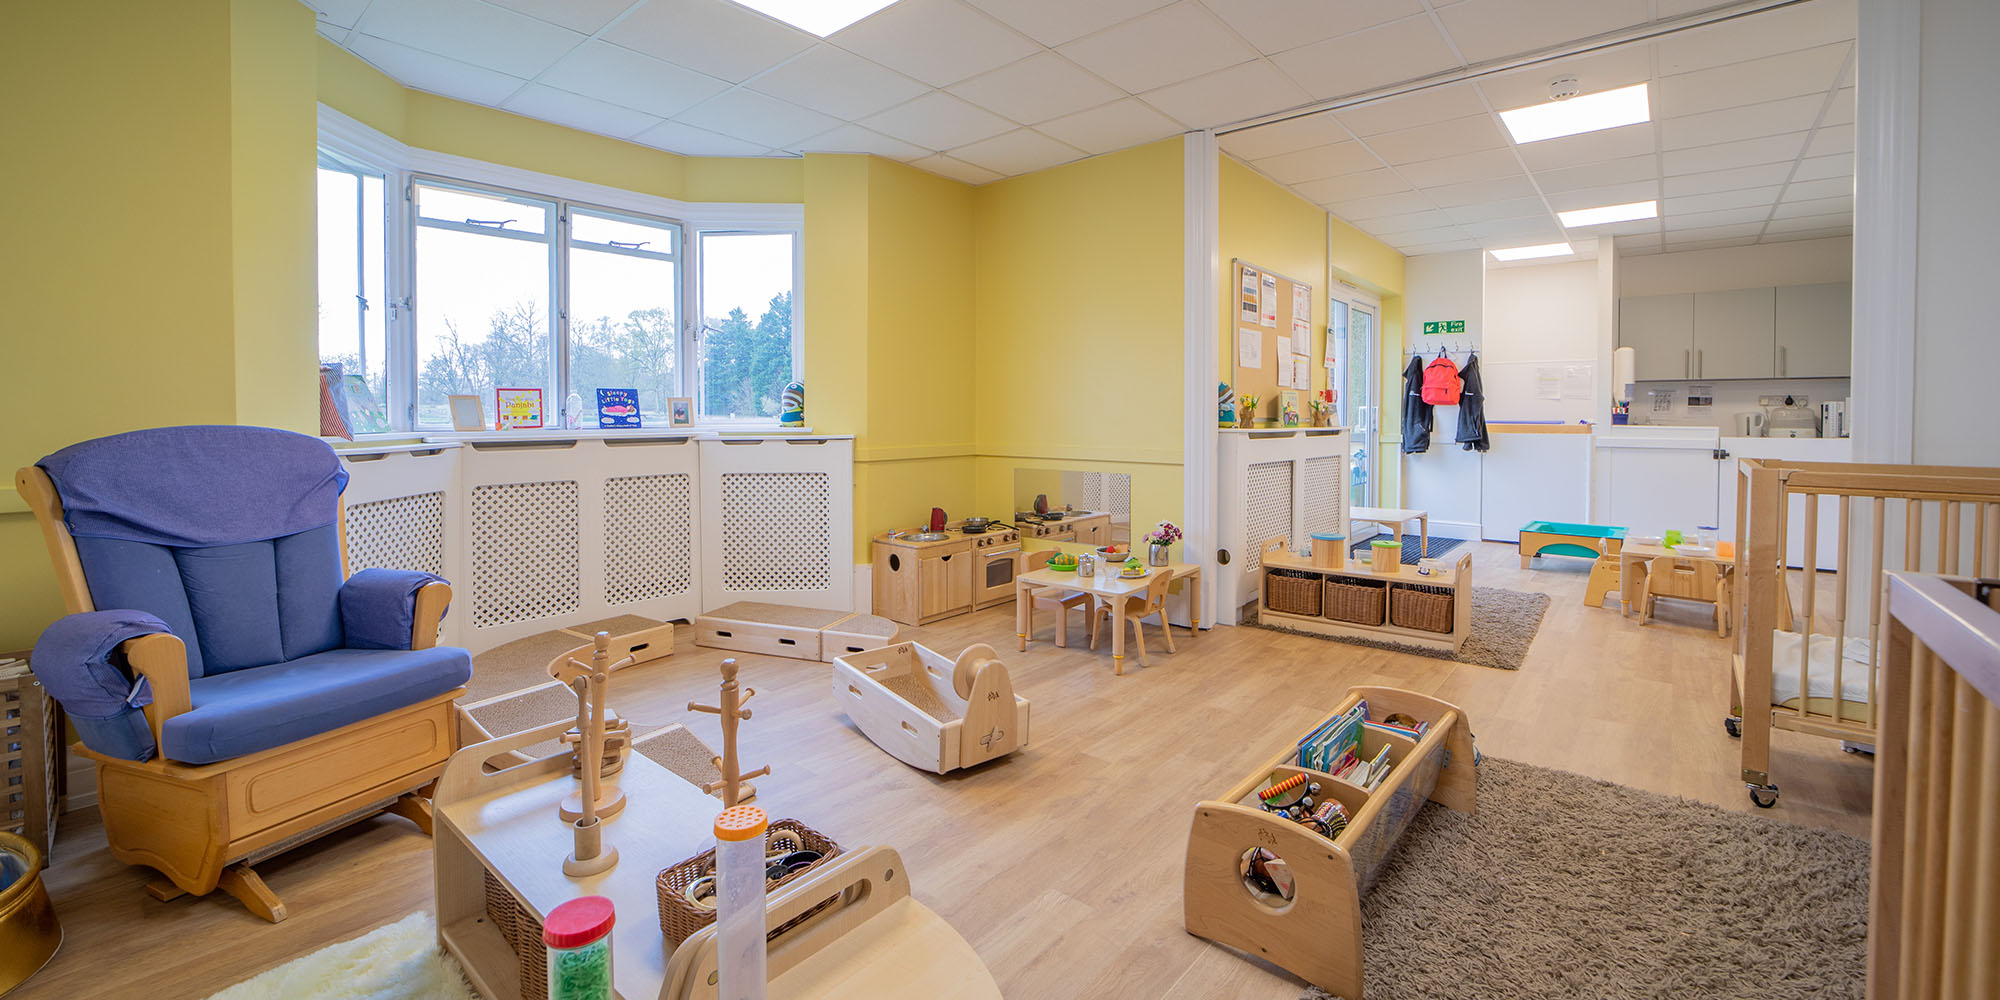 Baby Room - Chandlers Ford Day Nursery and Preschool